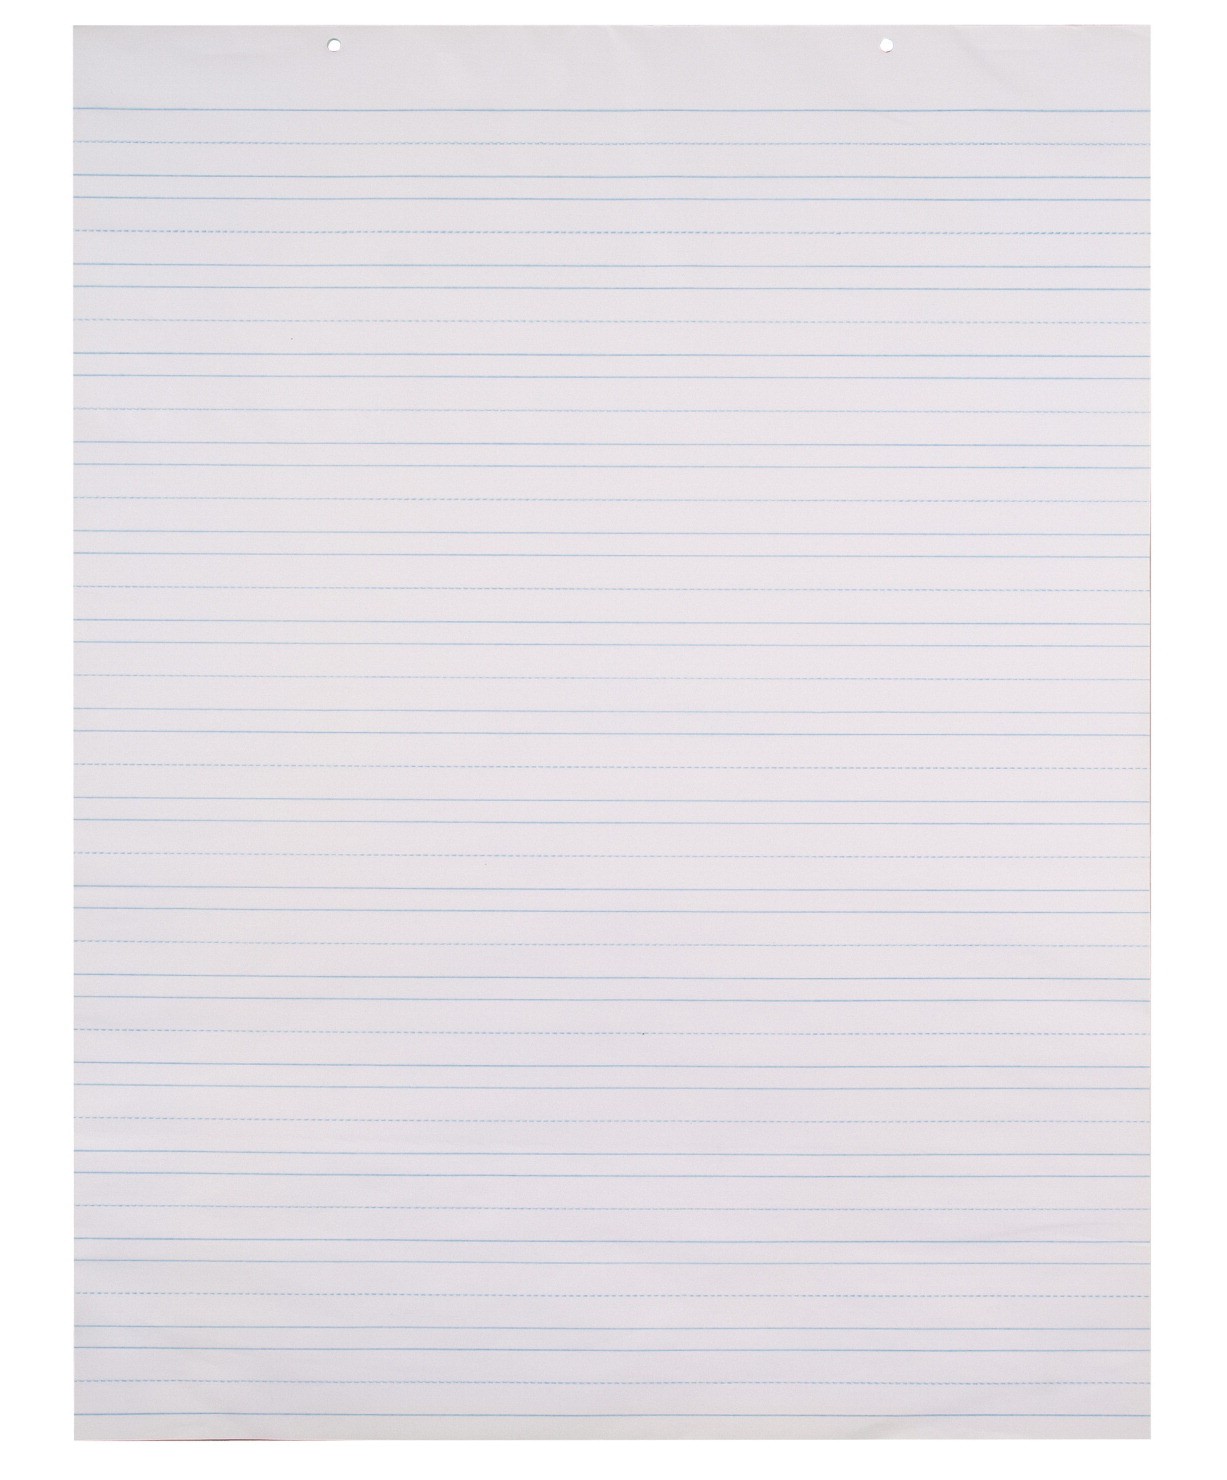 24 X 32 Primary Chart Paper Pad, White, 1-1/2" Ruled, 70 Sheets